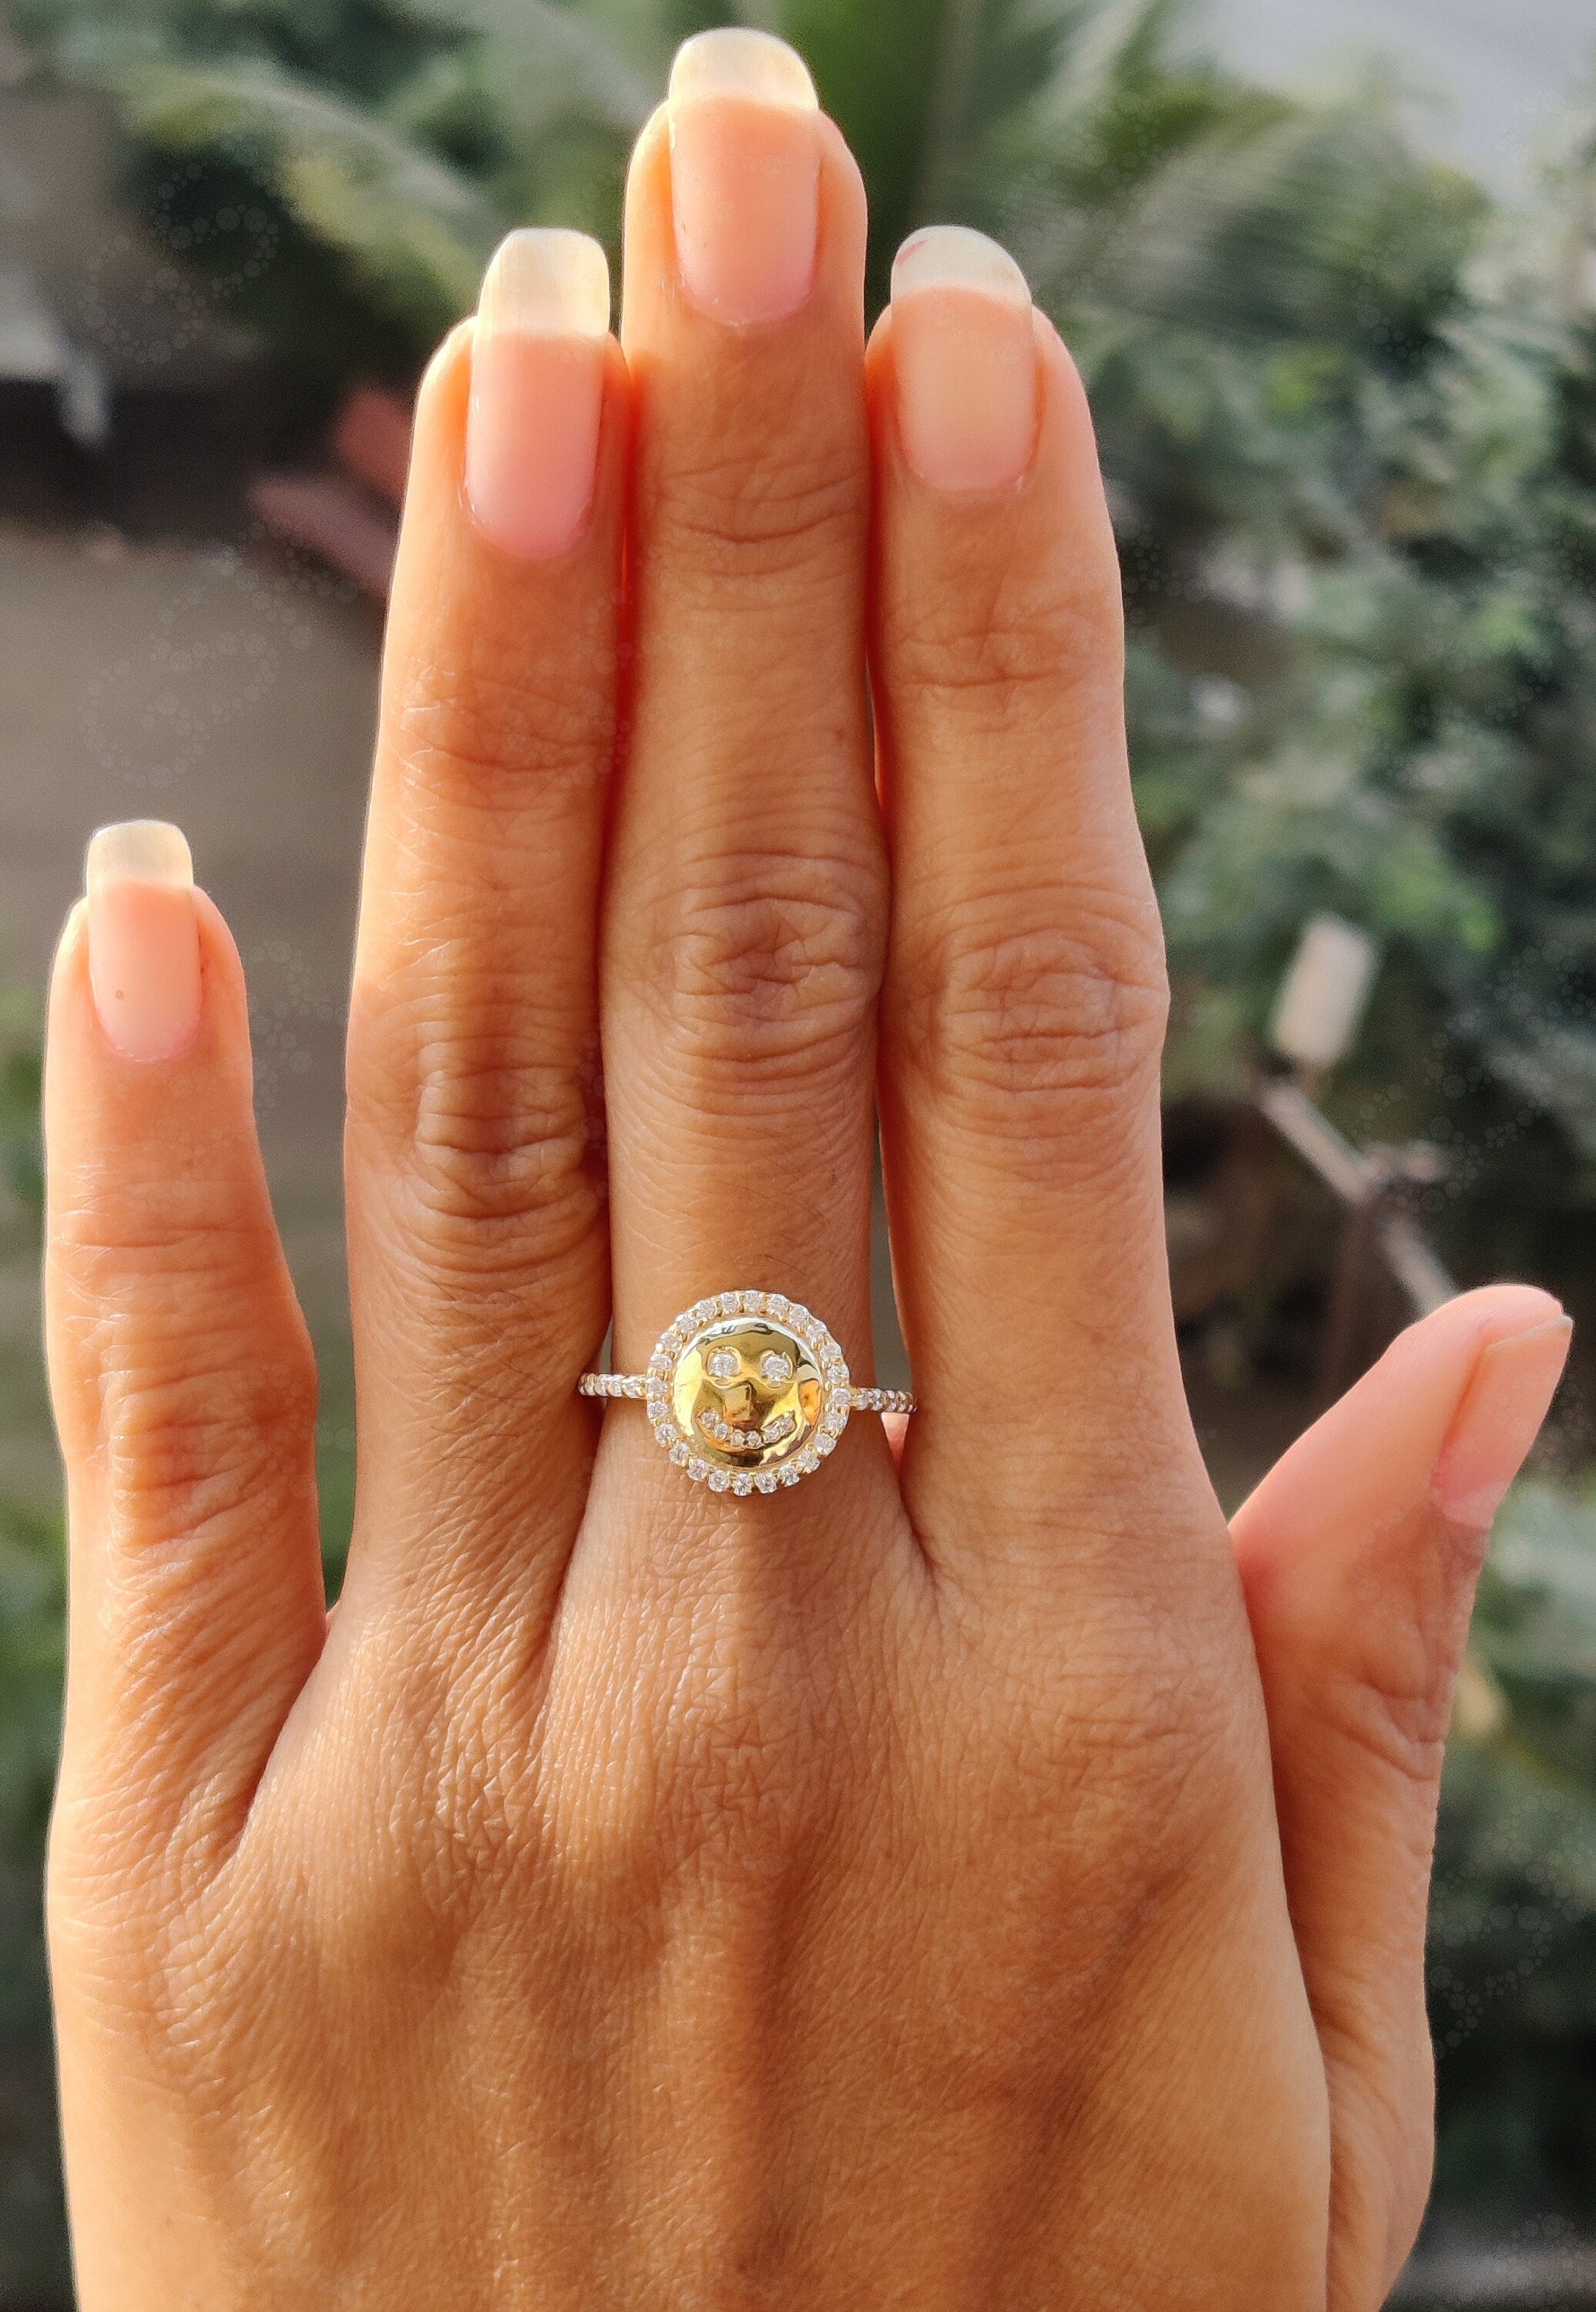 Express Your Joy: Silver and Gold Smiley Face Moissanite Ring, a Playful Stacking Ring for a Unique and Fun Look